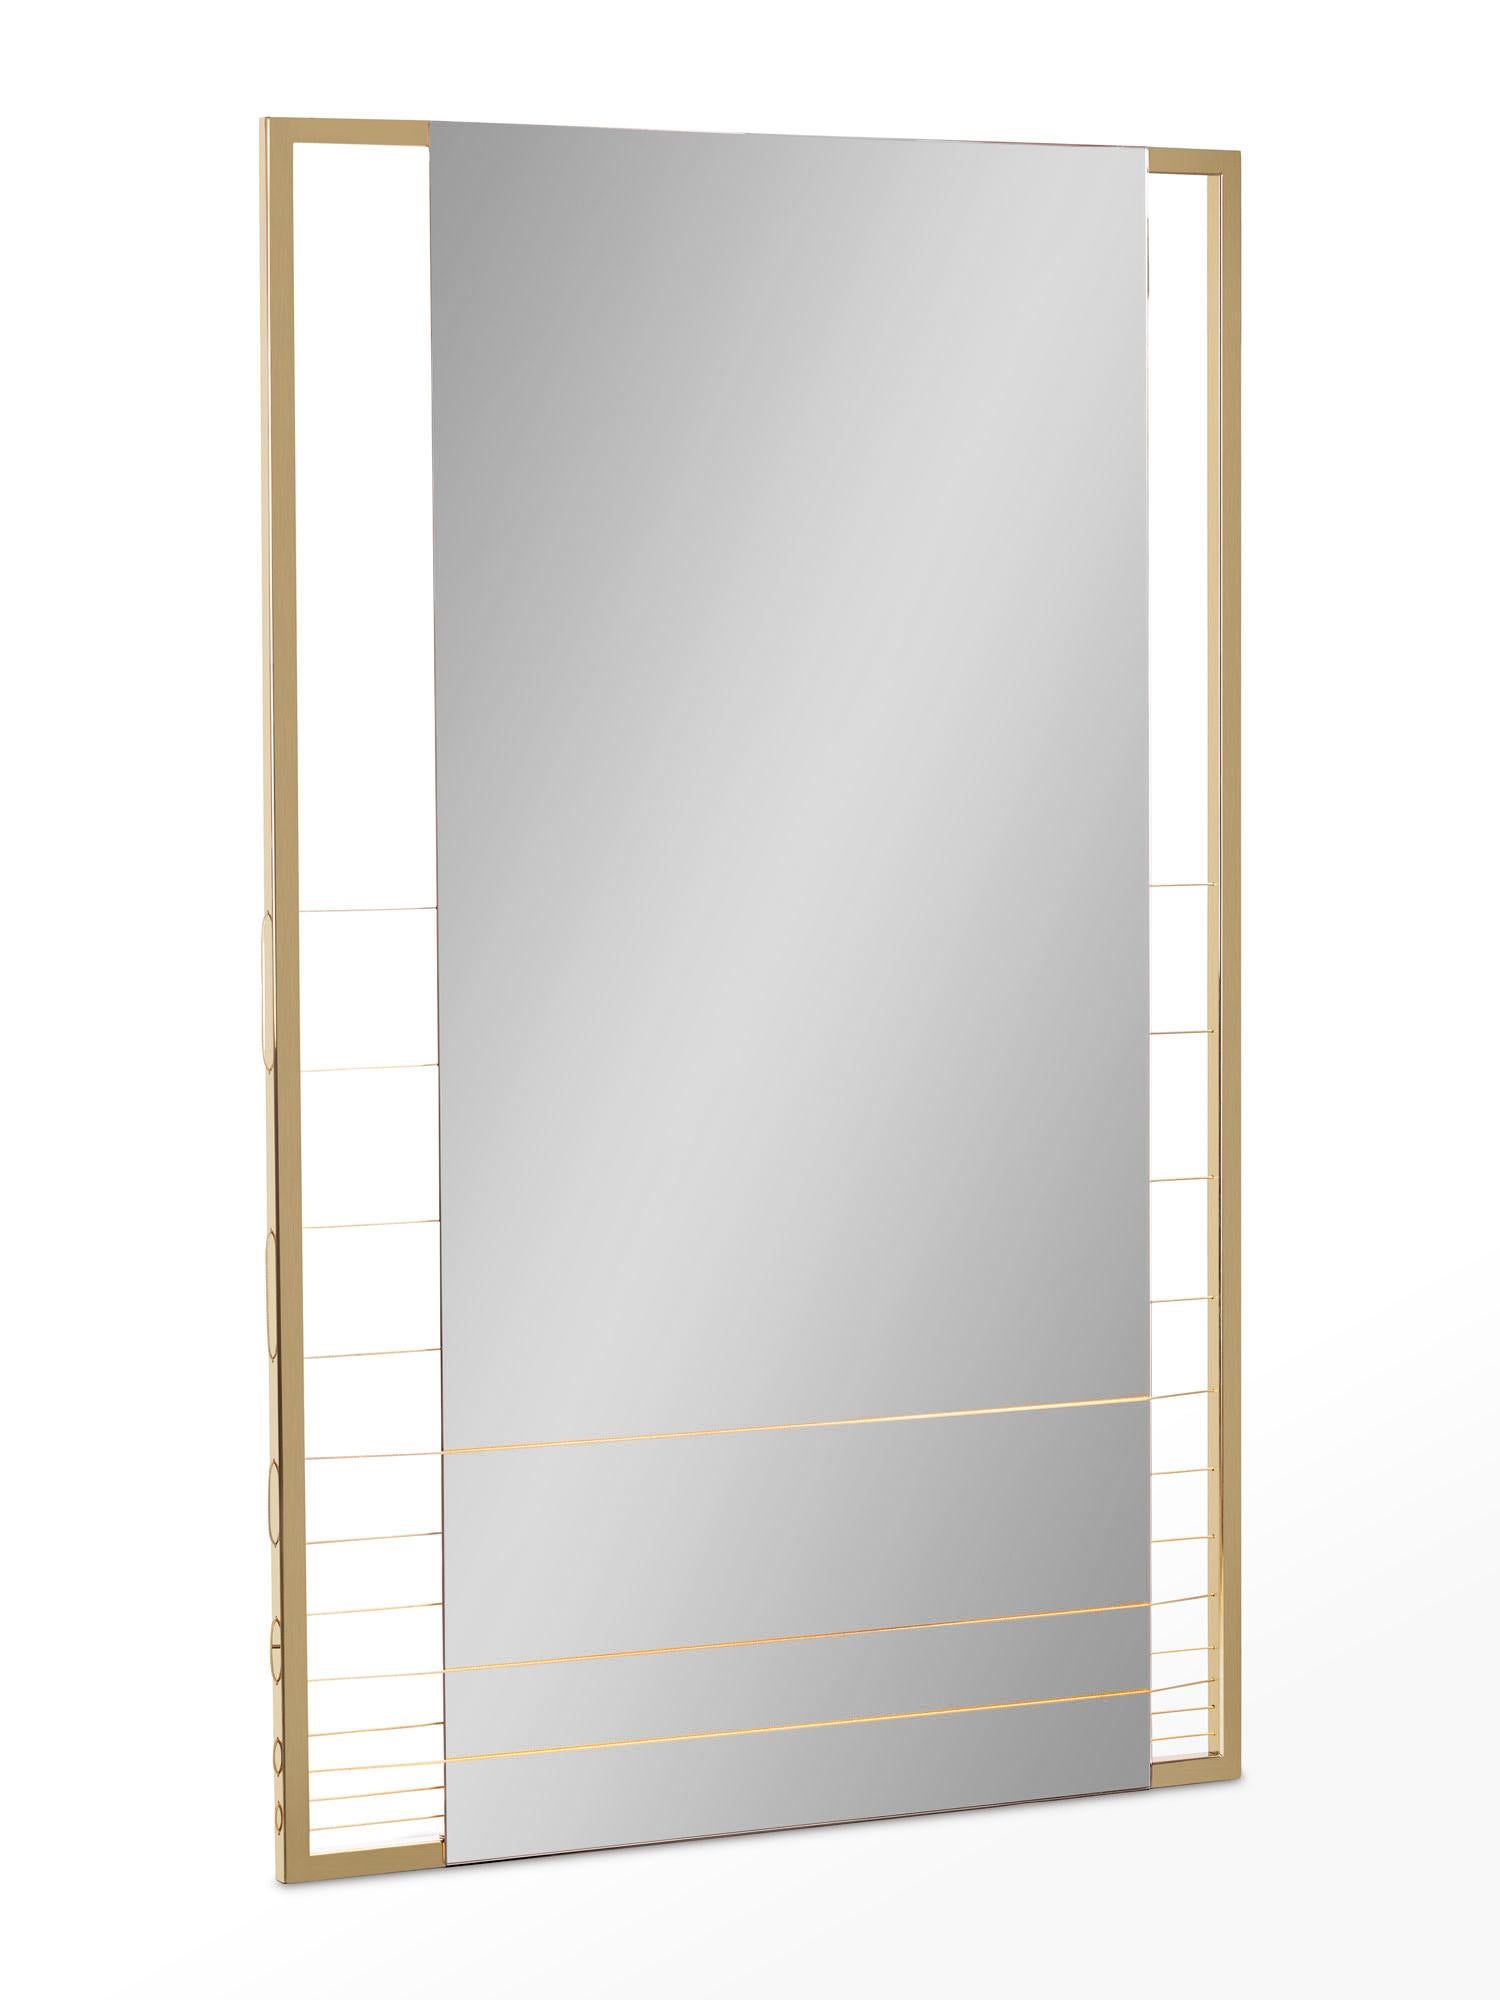 Aegis-M mirror is made to order using gold finish stainless steel frame, tinted mirror and gold steel wire. The mirror can be hung vertically or horizontally. A modern contemporary design using only the finest materials and manufacturing methods.